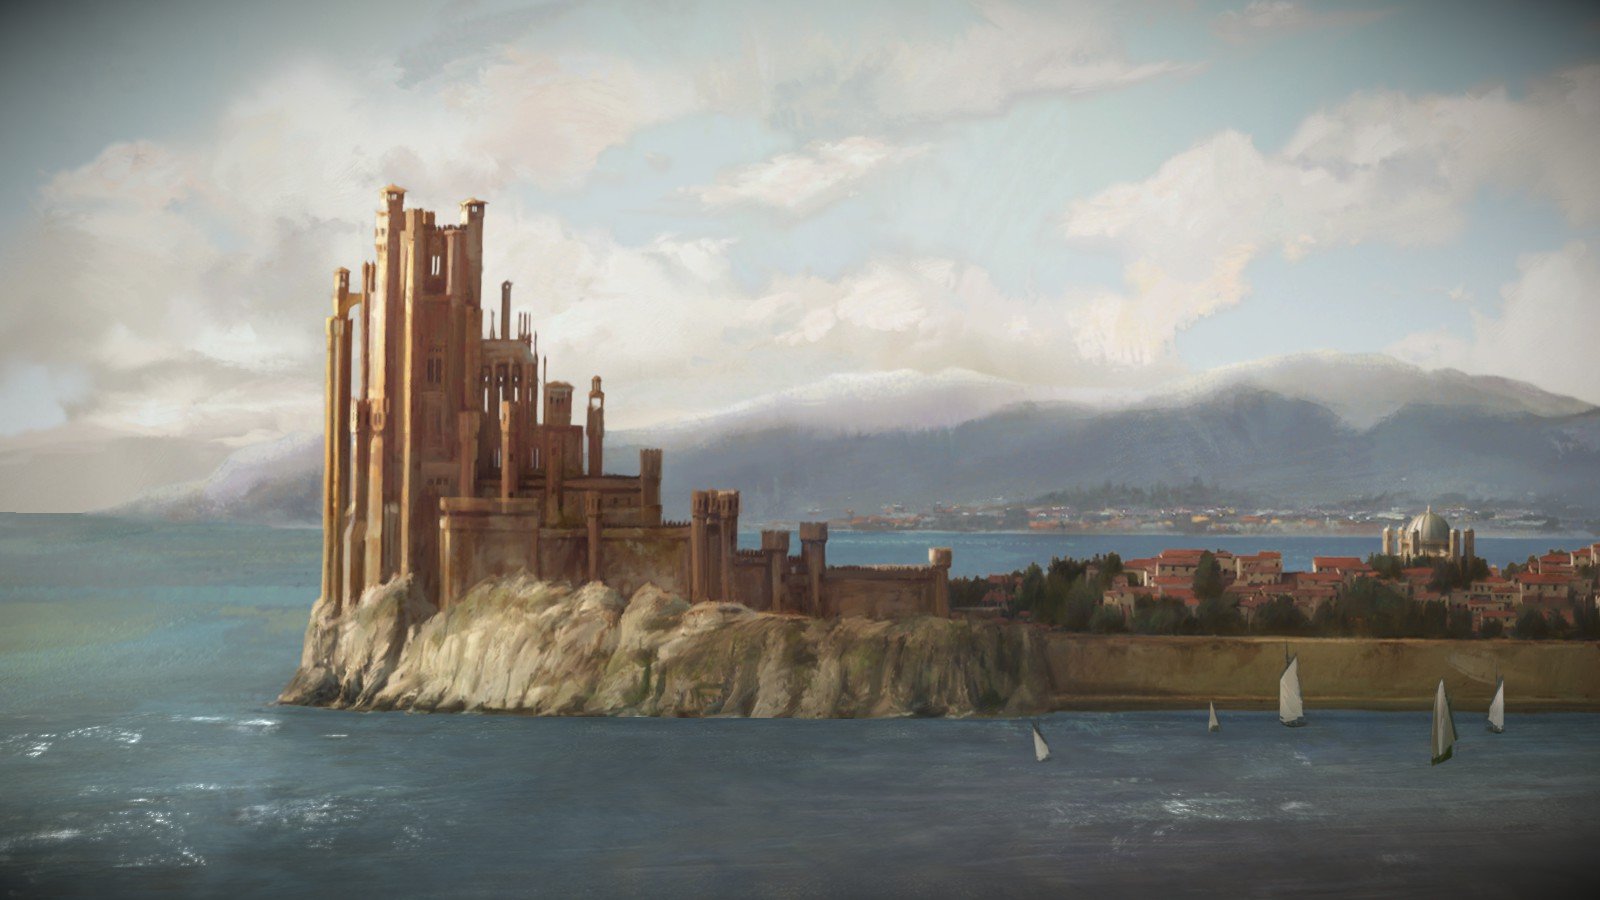 game of thrones a telltale games series ign review